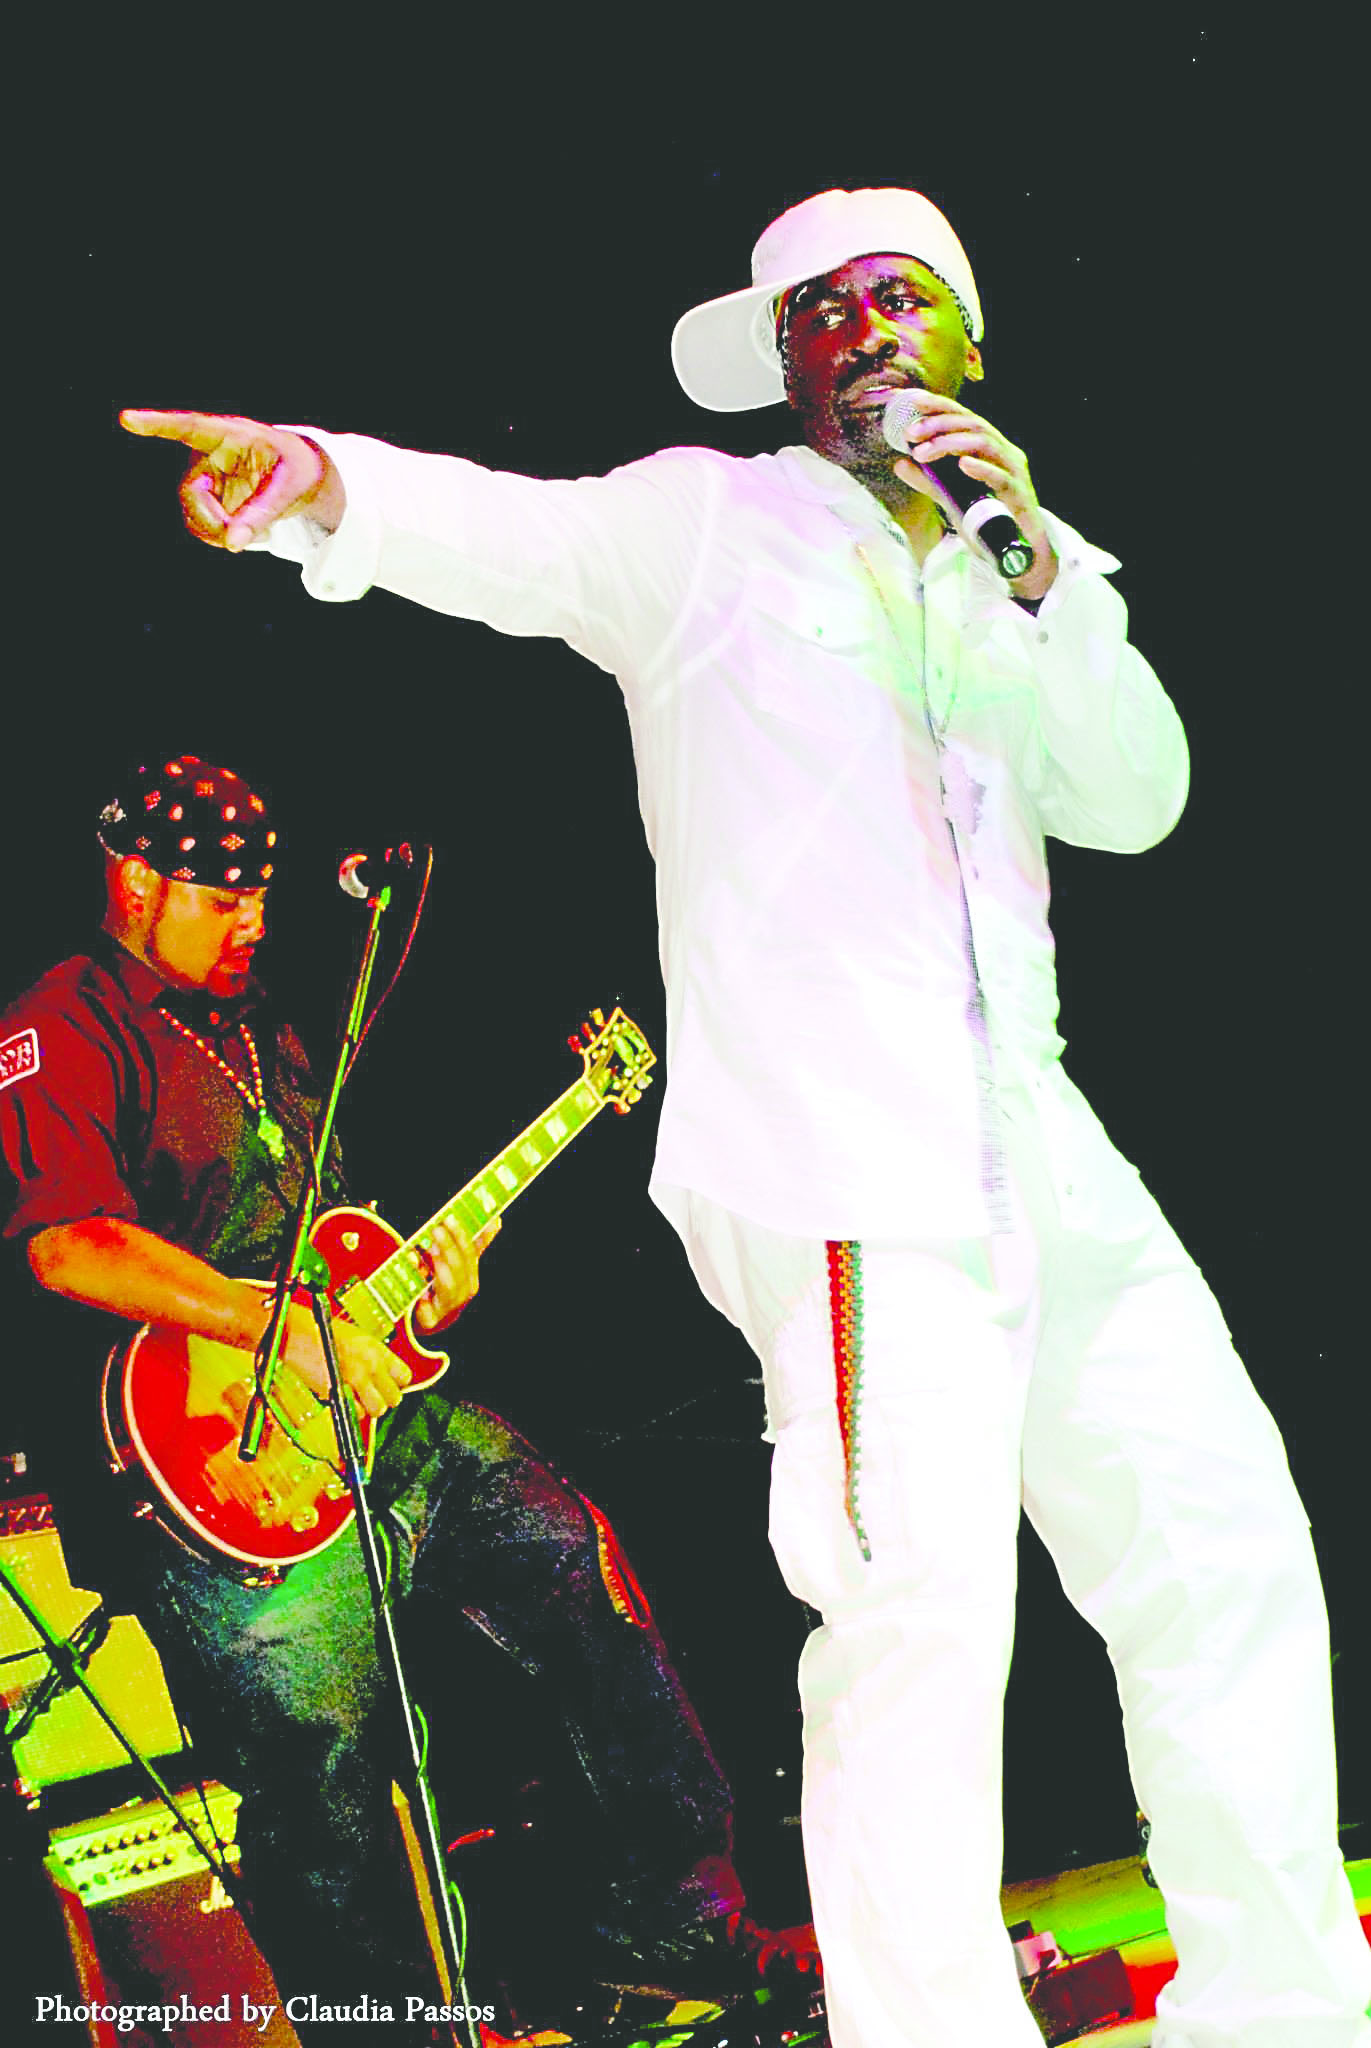 Pato Banton will bring the Now Generation and a positive life message to the Elks Naval Lodge in Port Angeles on Sunday.